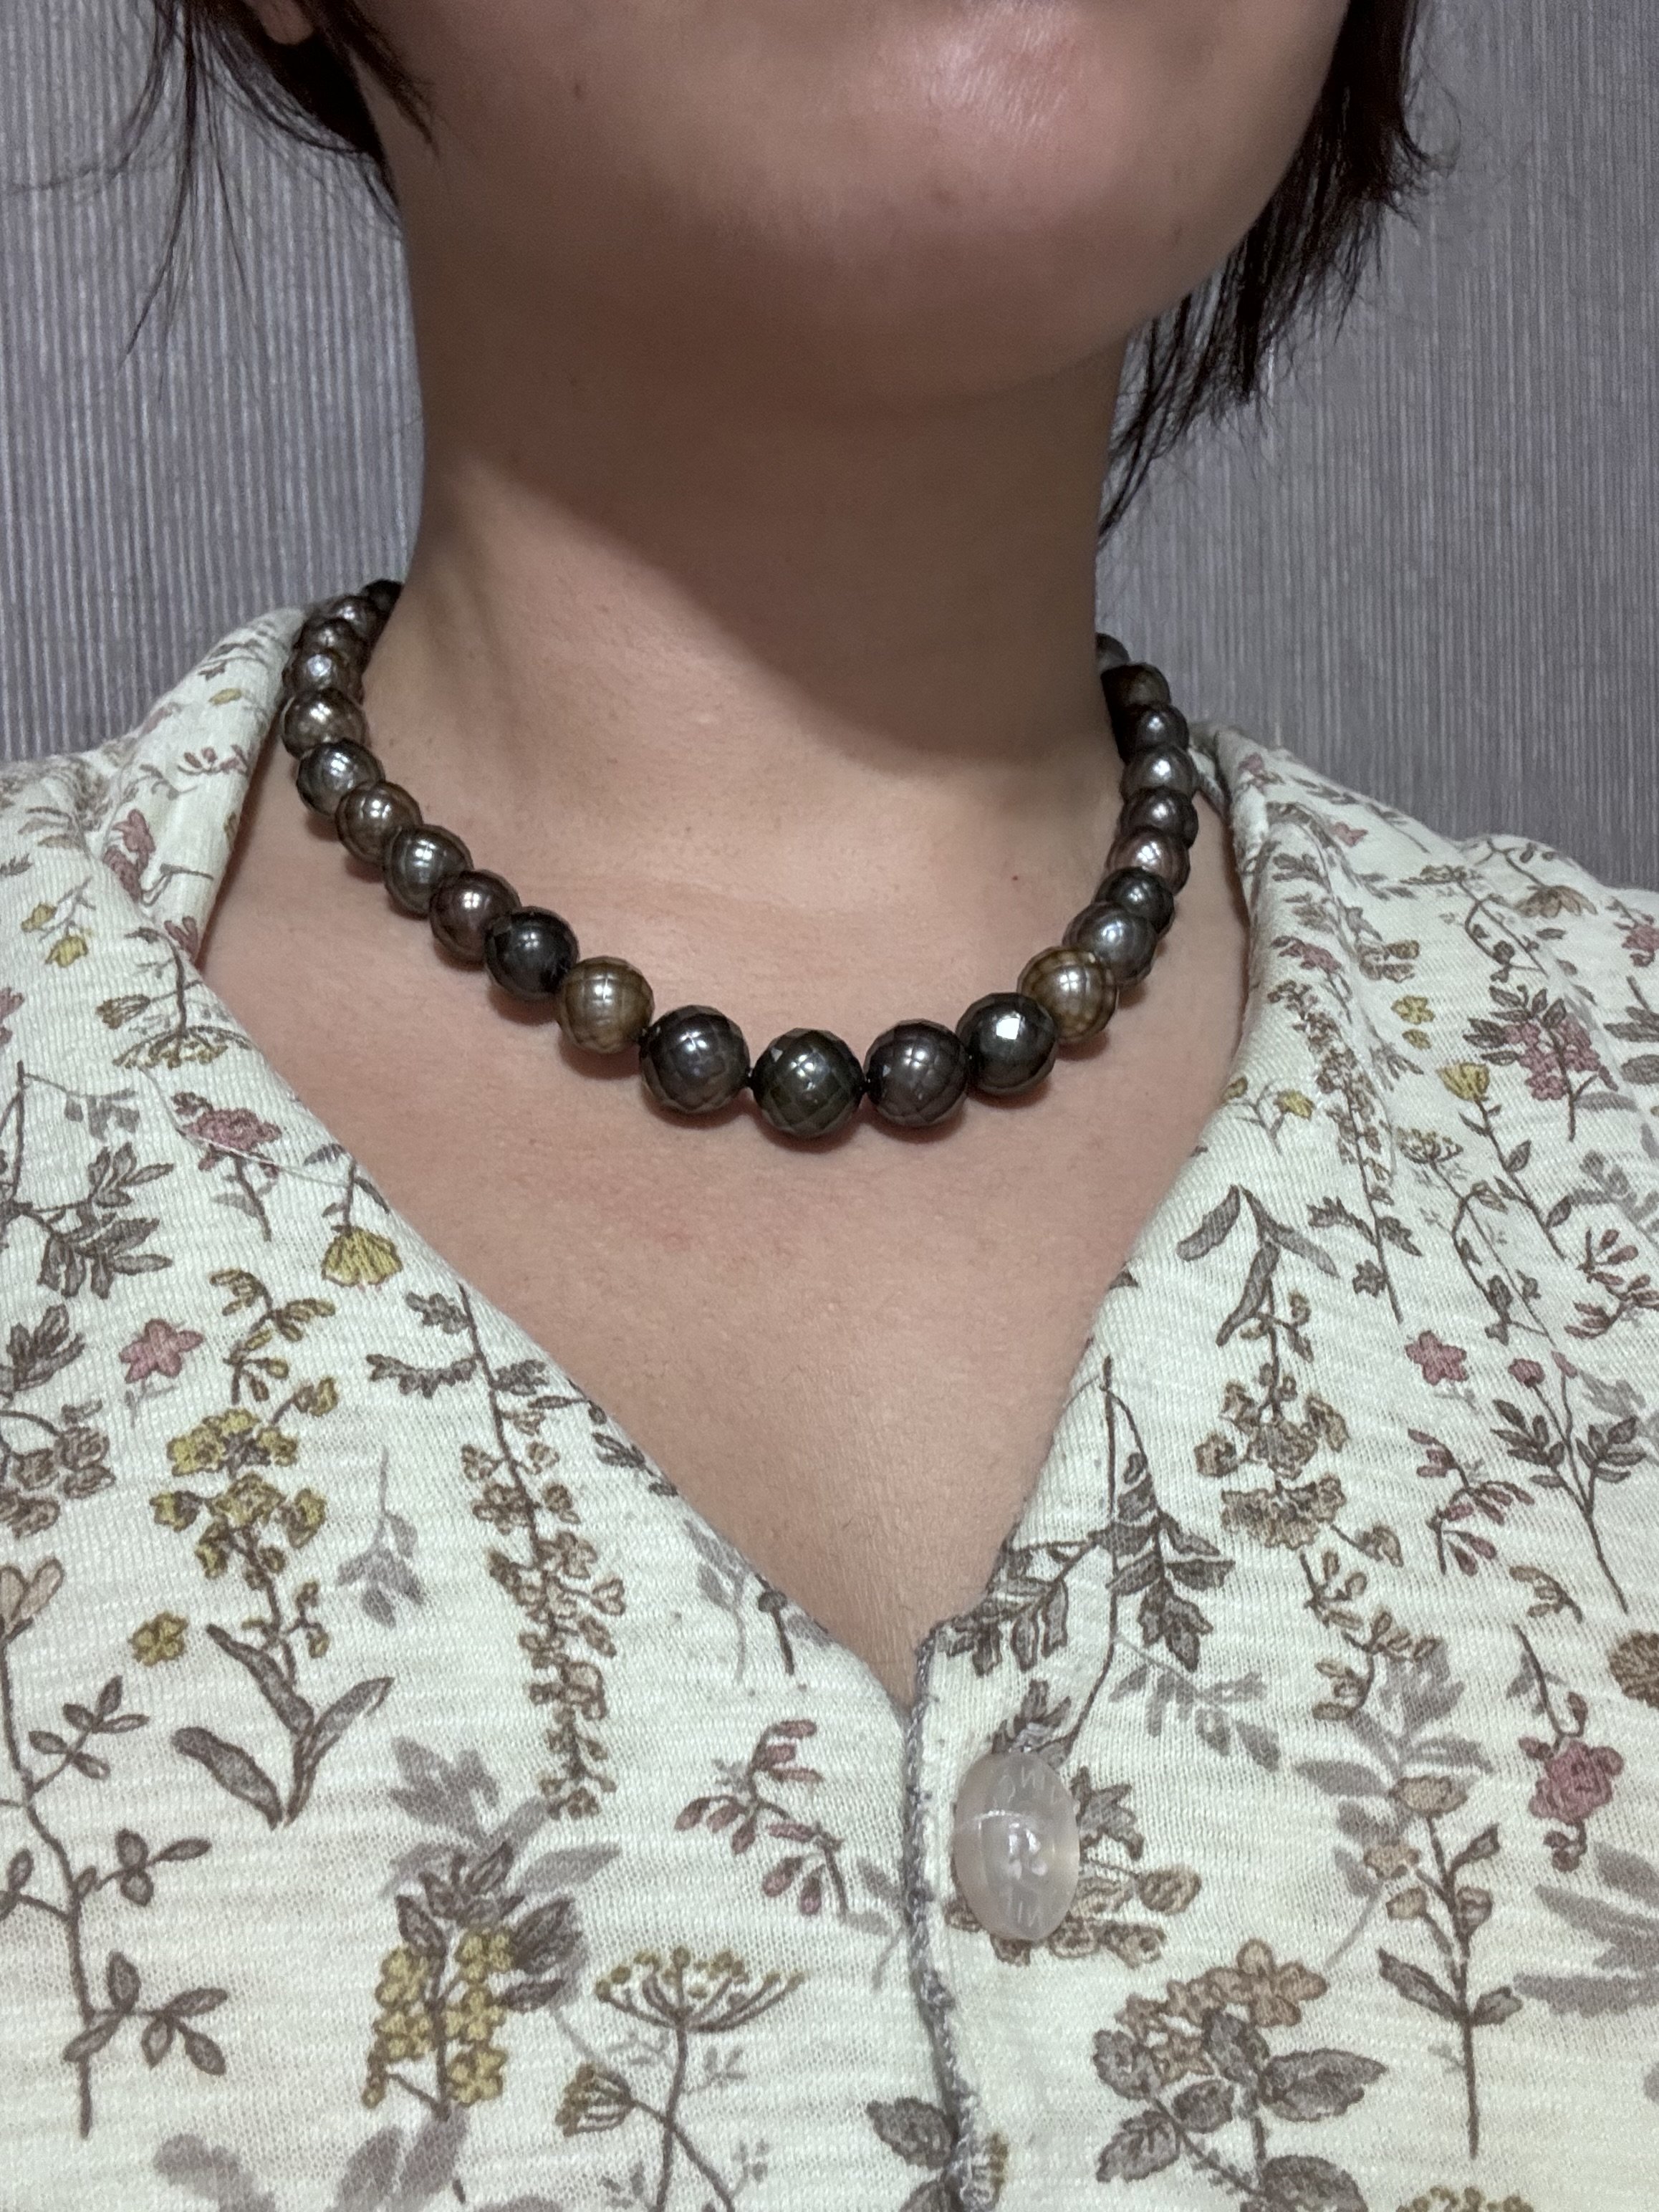 Do these faceted Tahitian pearls look “problematic”?